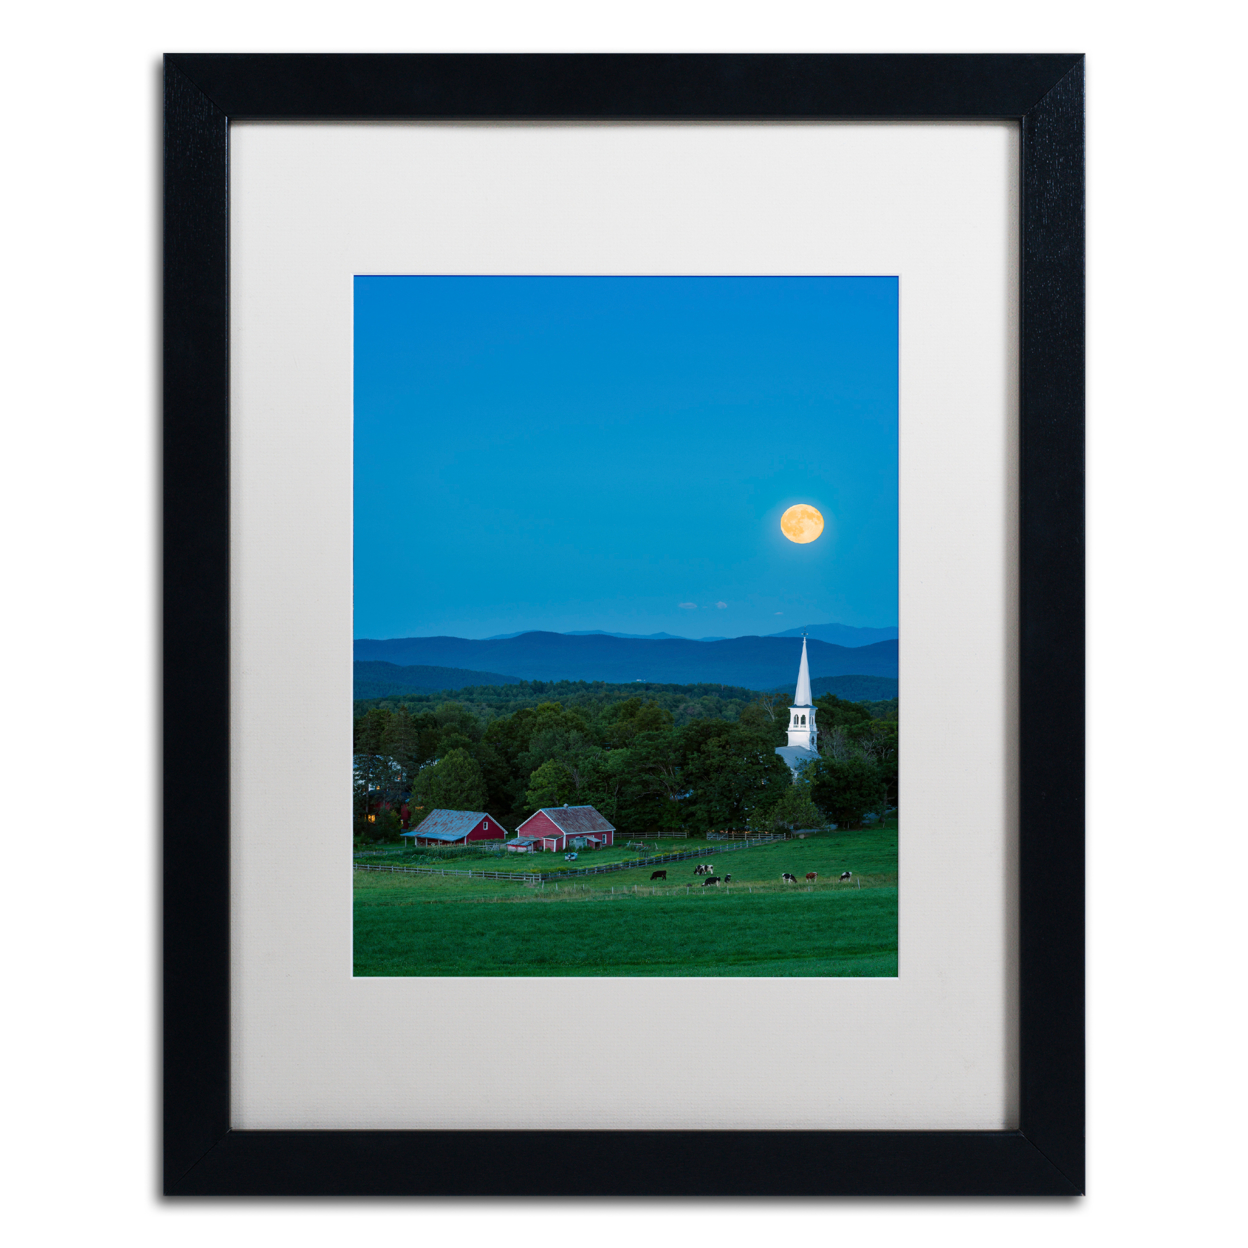 Michael Blanchette Photography 'Pointing At Moon' Black Wooden Framed Art 18 X 22 Inches